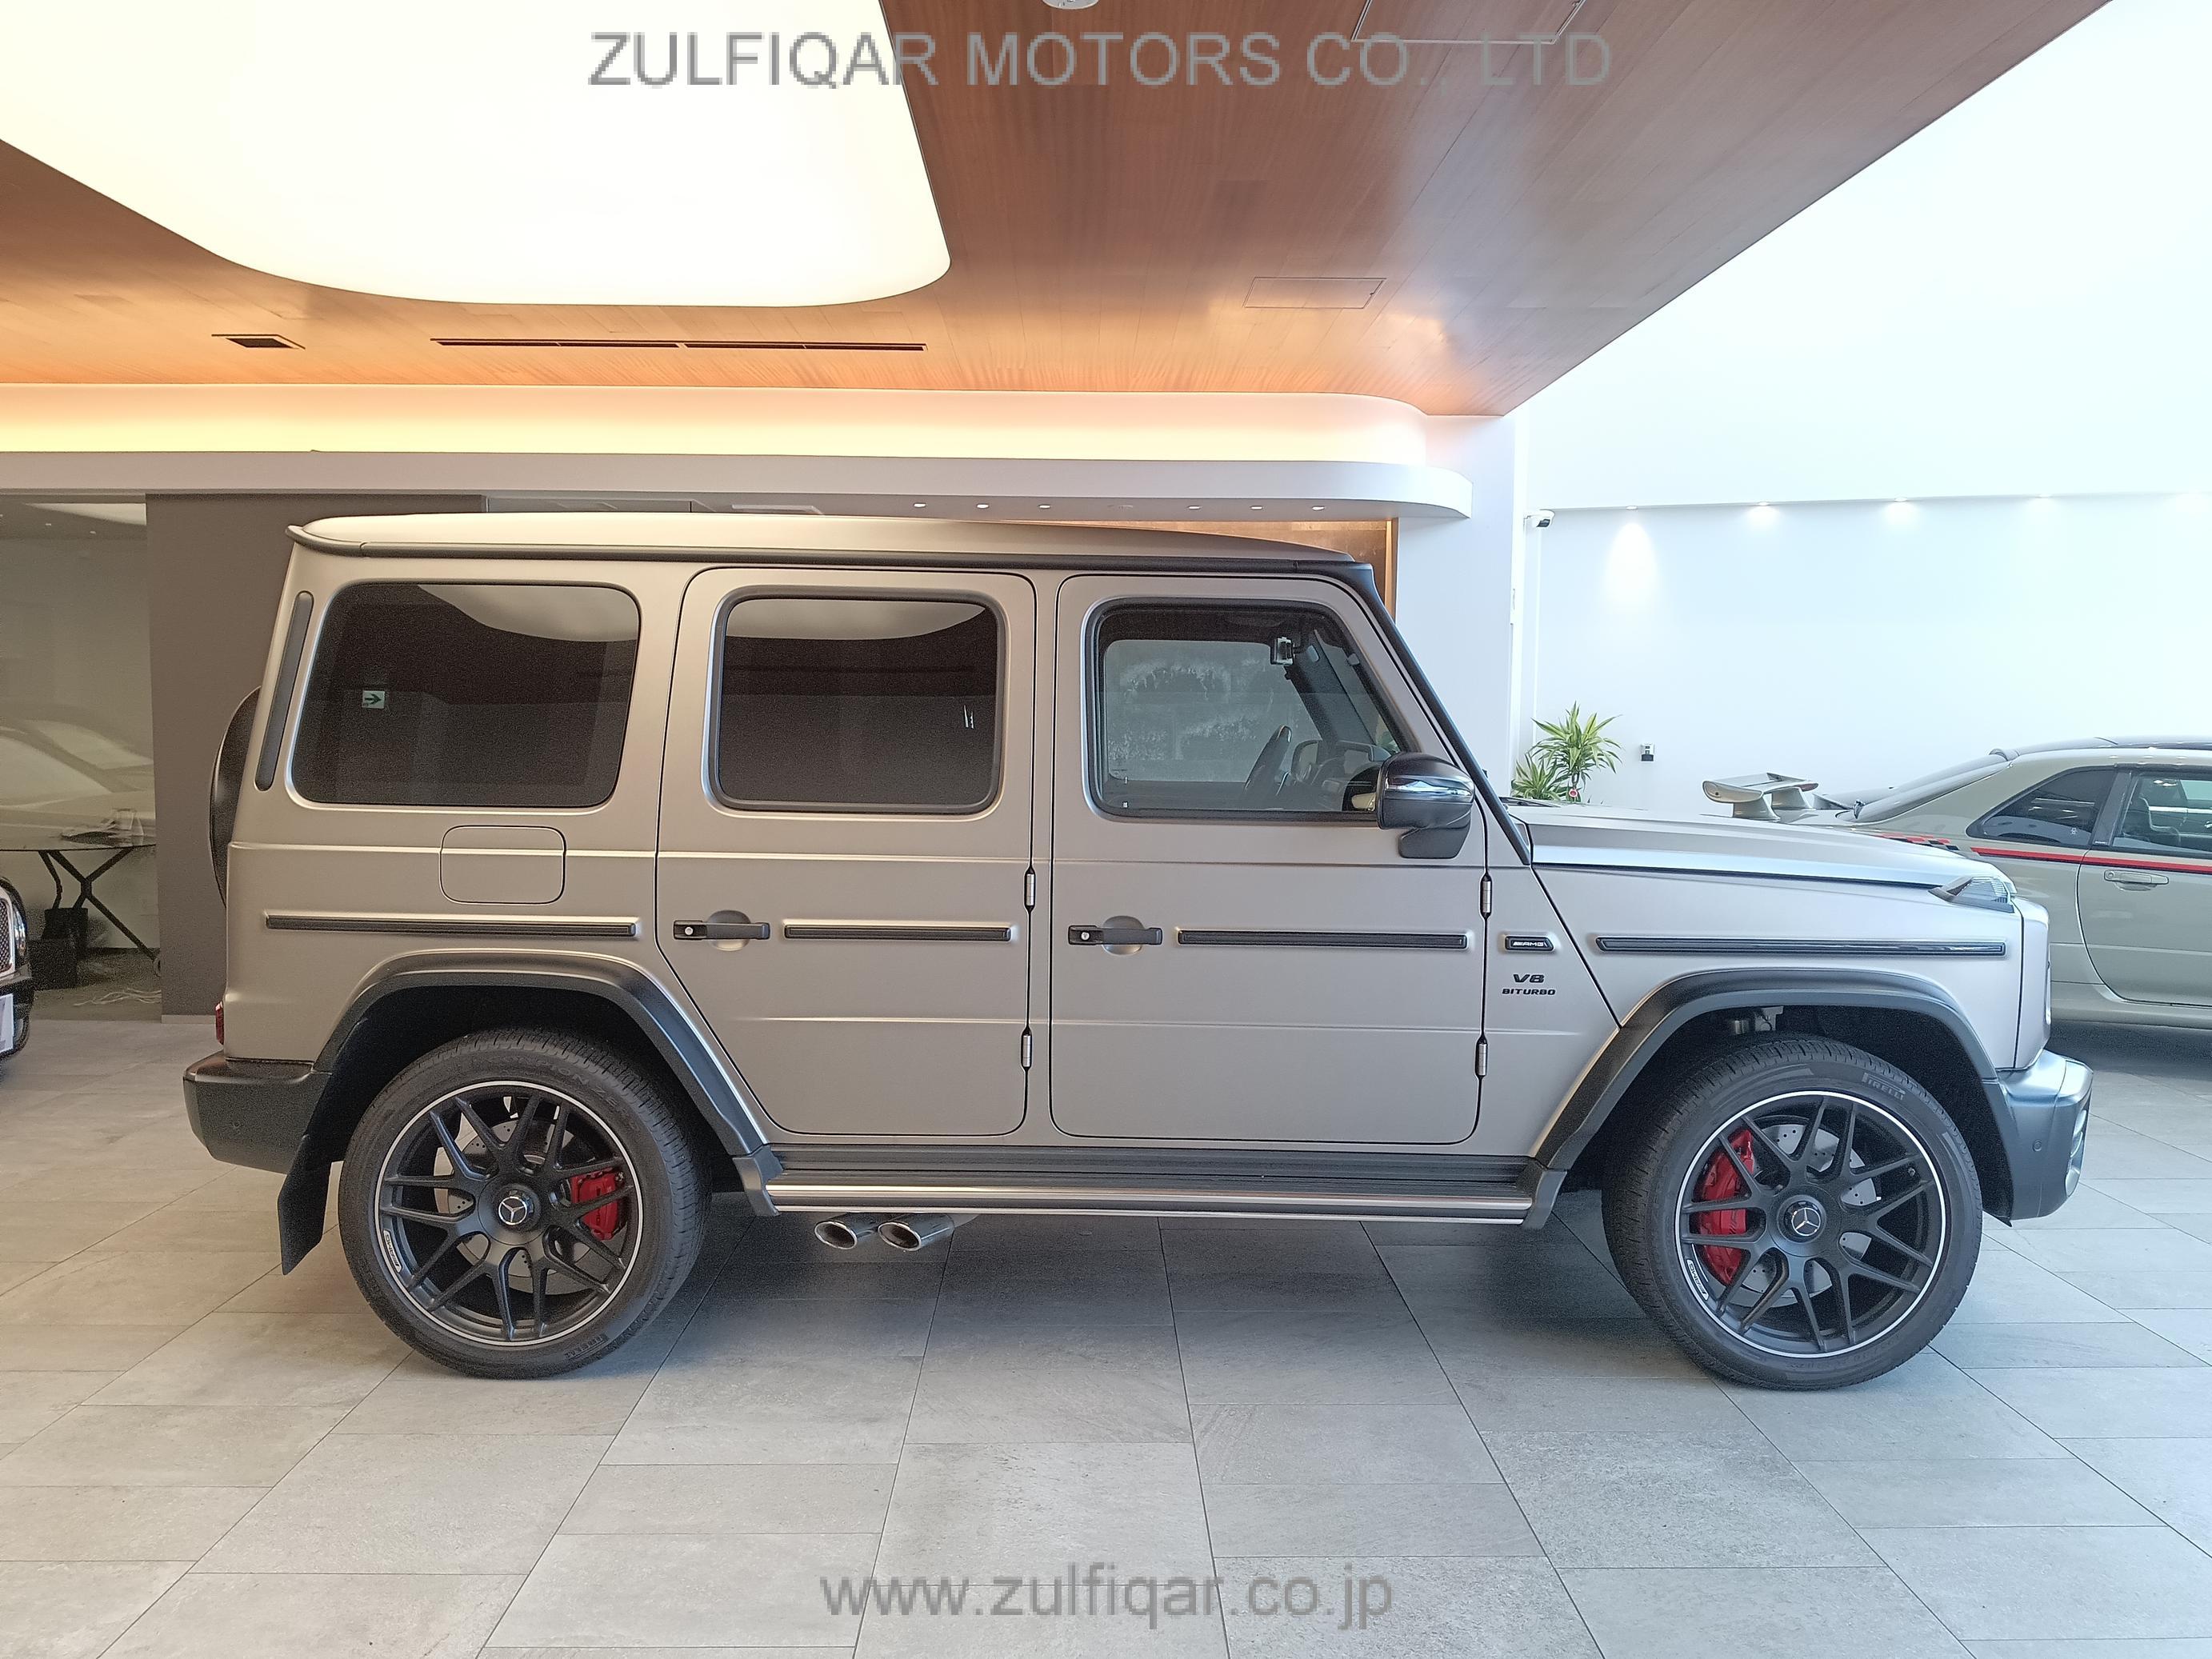 MERCEDES AMG G CLASS 2021 Image 10